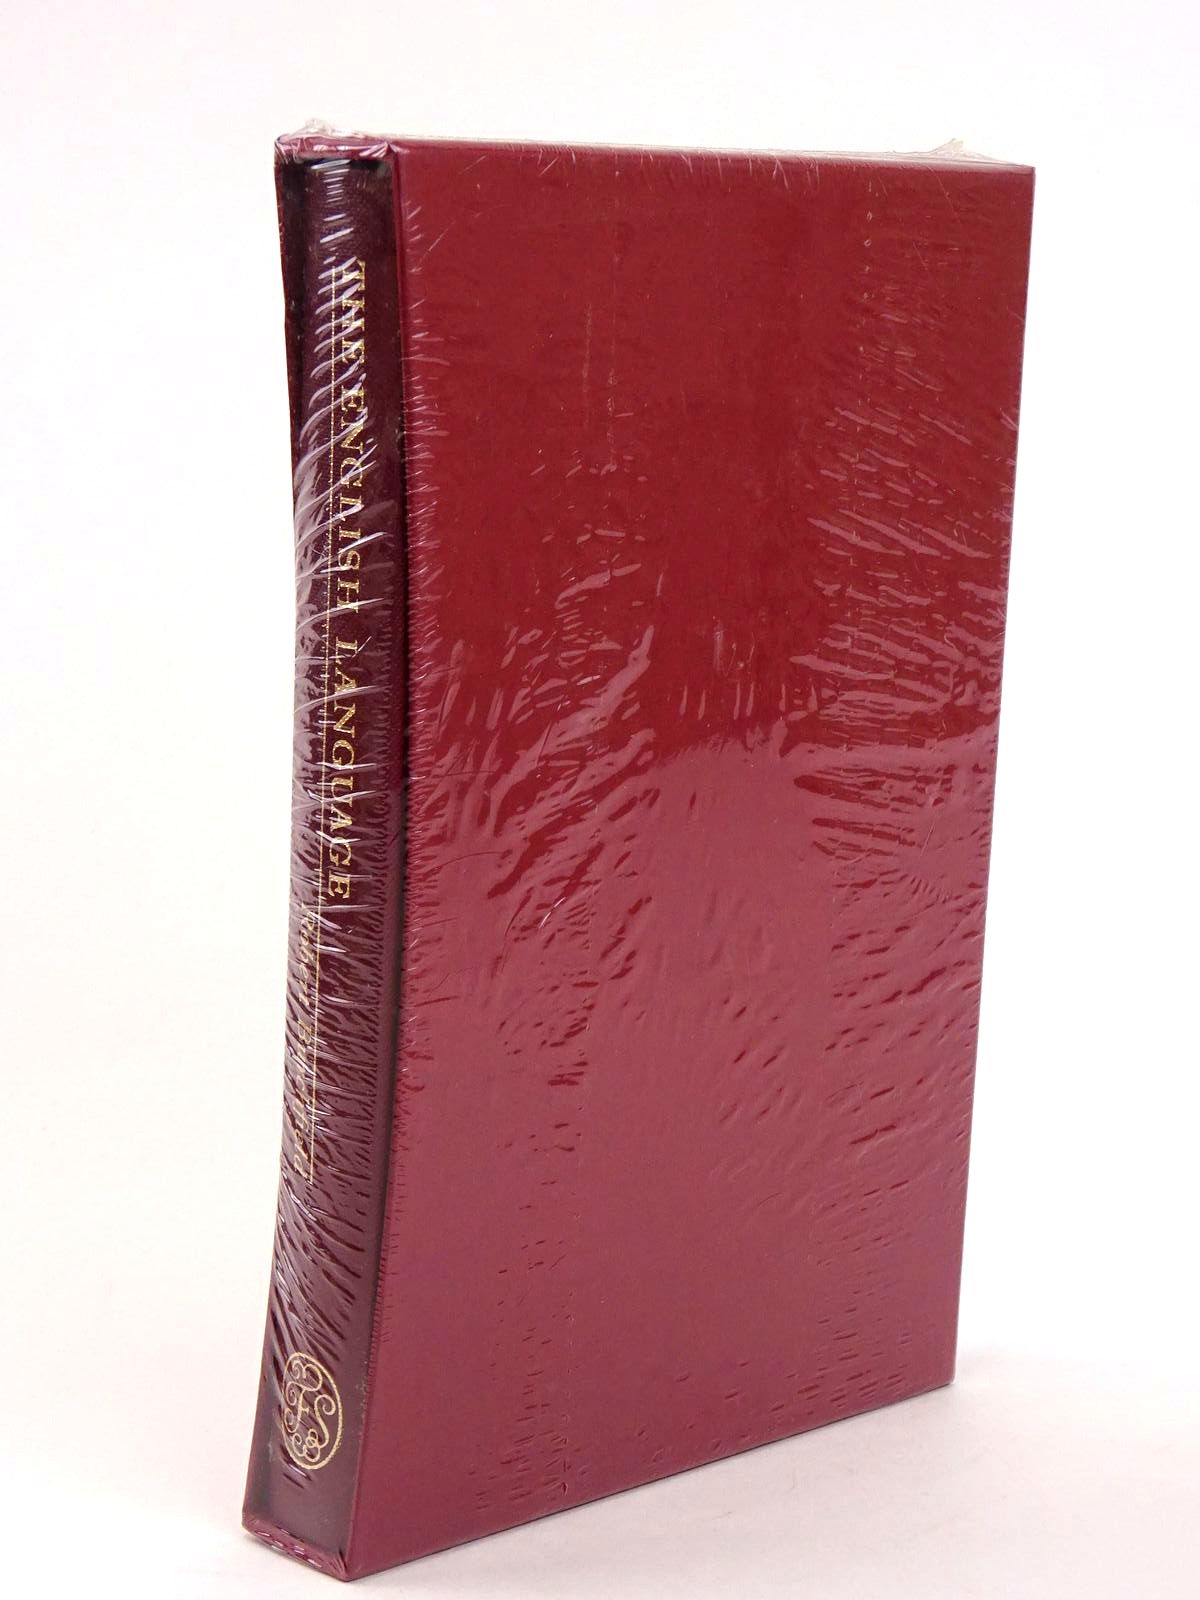 Photo of THE ENGLISH LANGUAGE written by Burchfield, Robert McCrum, Robert Simpson, John published by Folio Society (STOCK CODE: 1318365)  for sale by Stella & Rose's Books